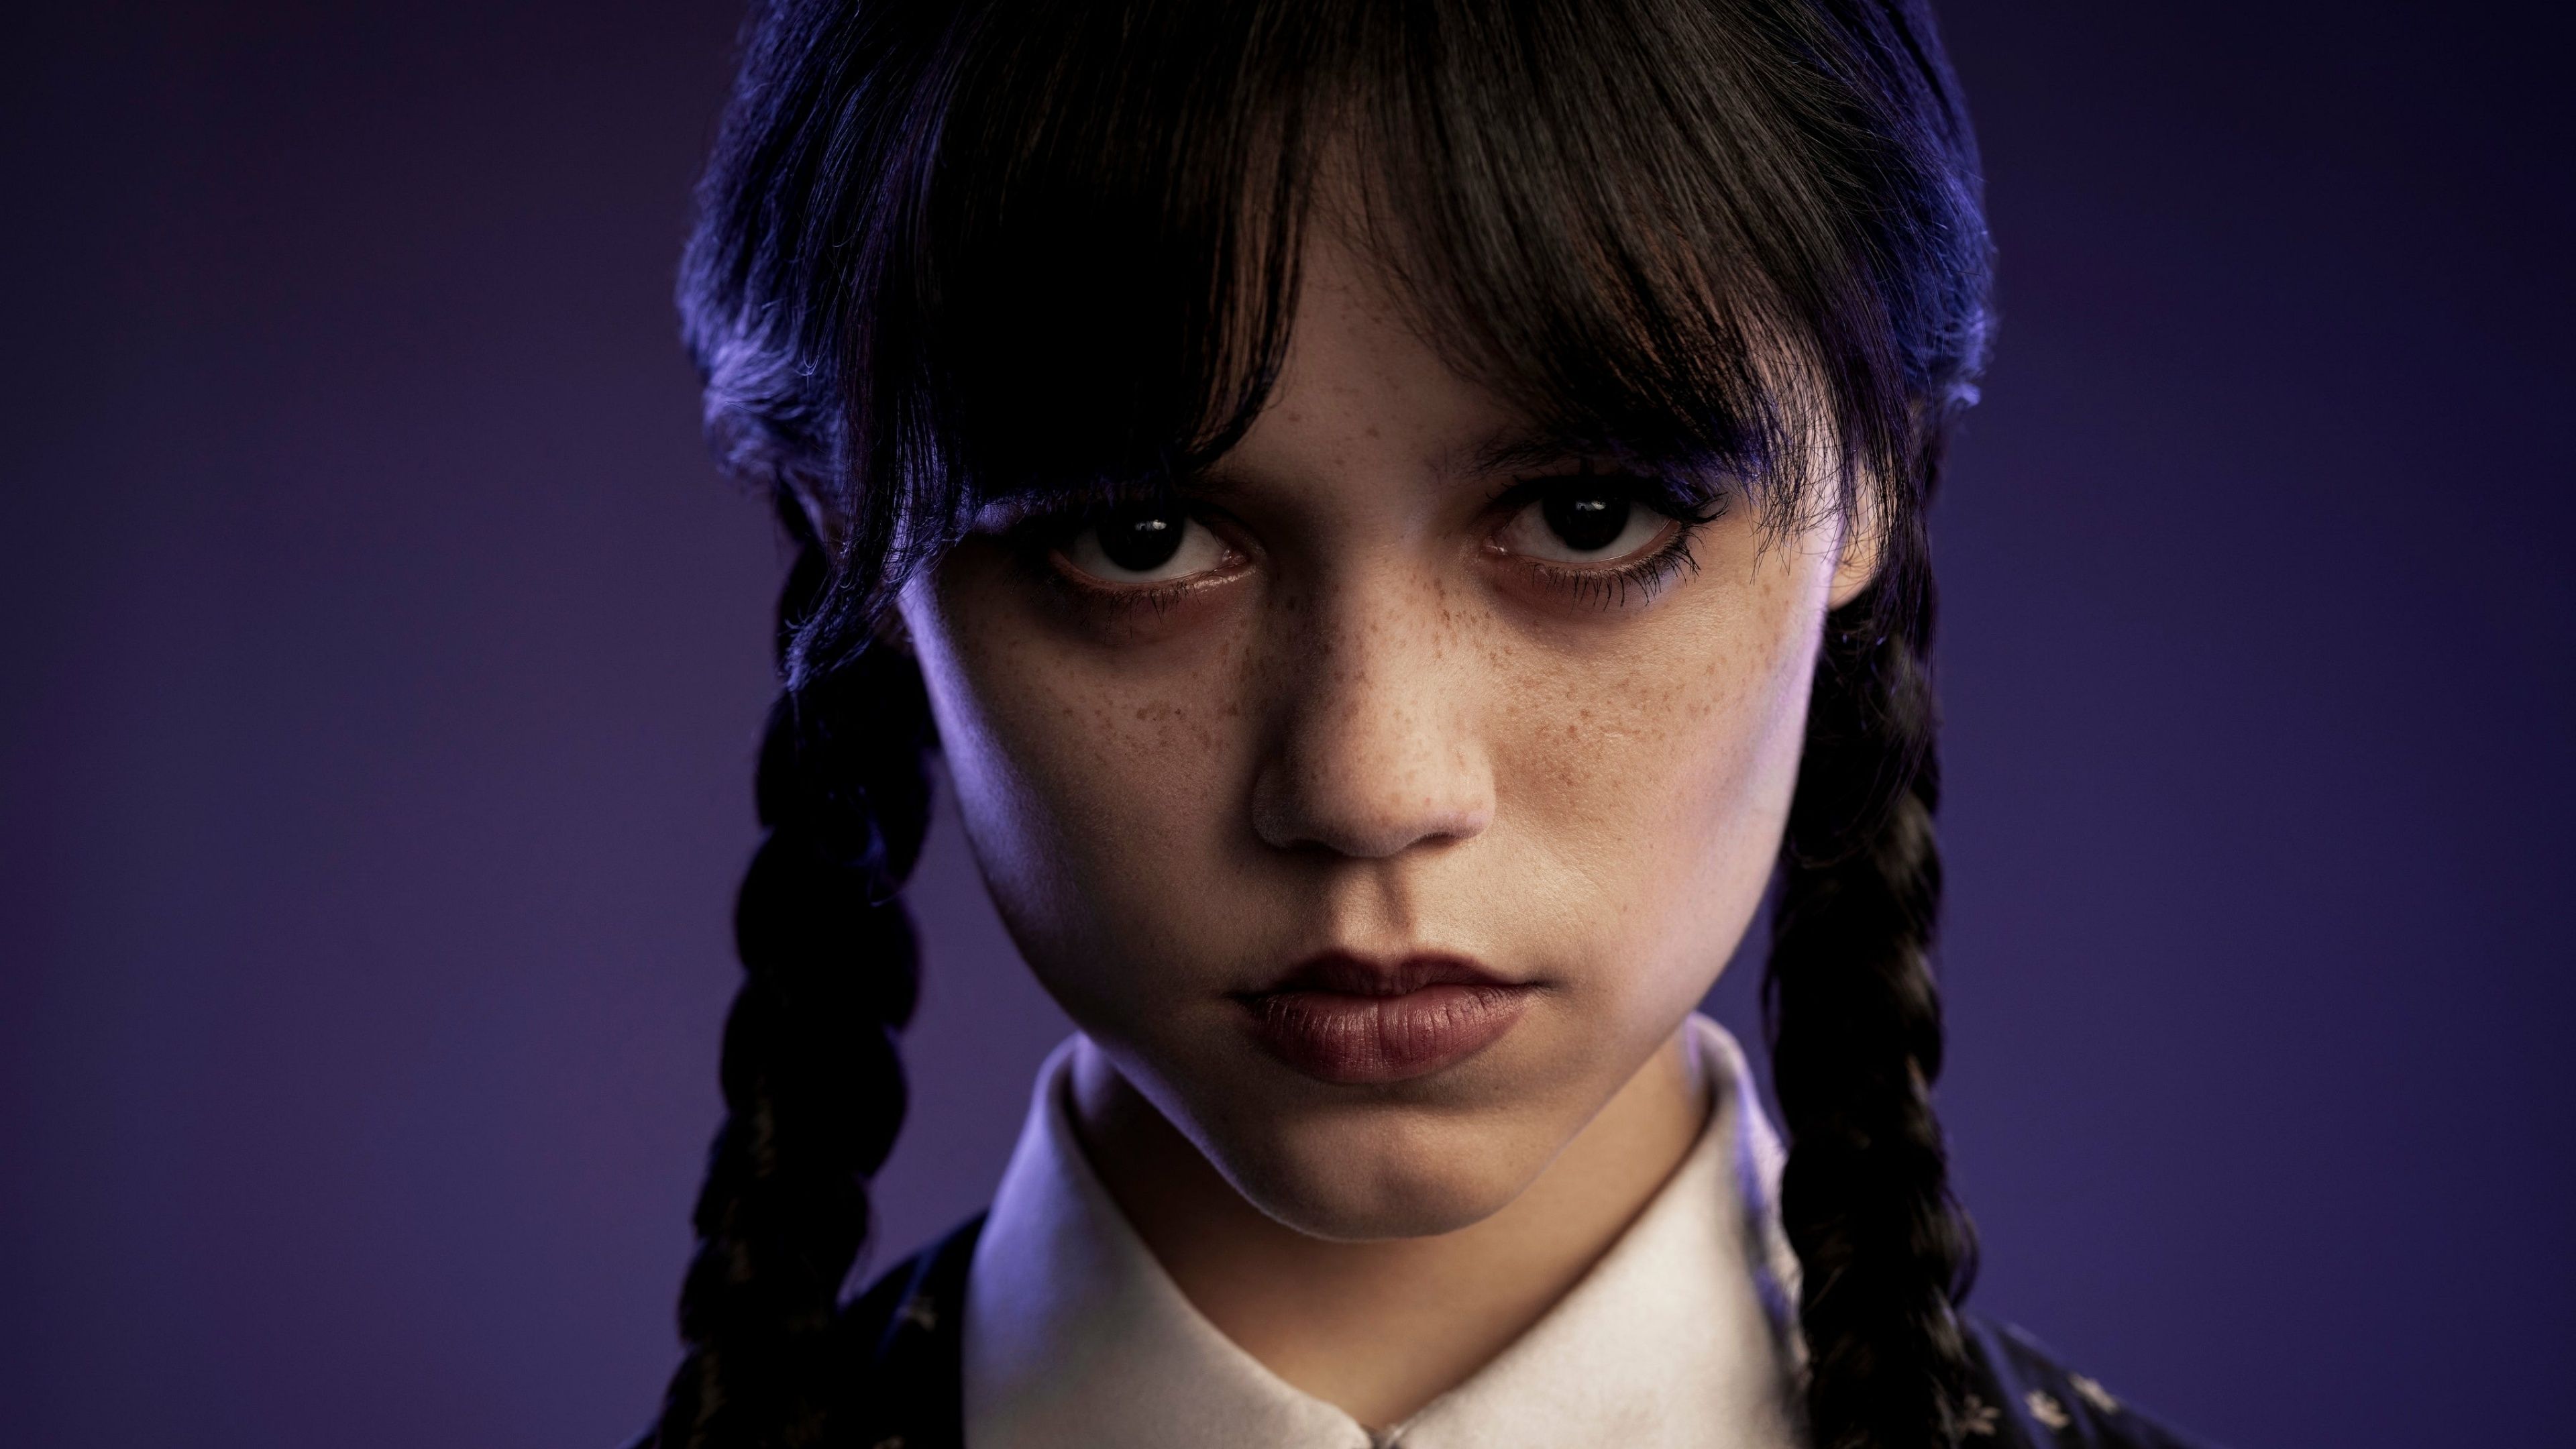 Wednesday Addams from the Addams Family staring into the camera with a purple background - Netflix, Wednesday